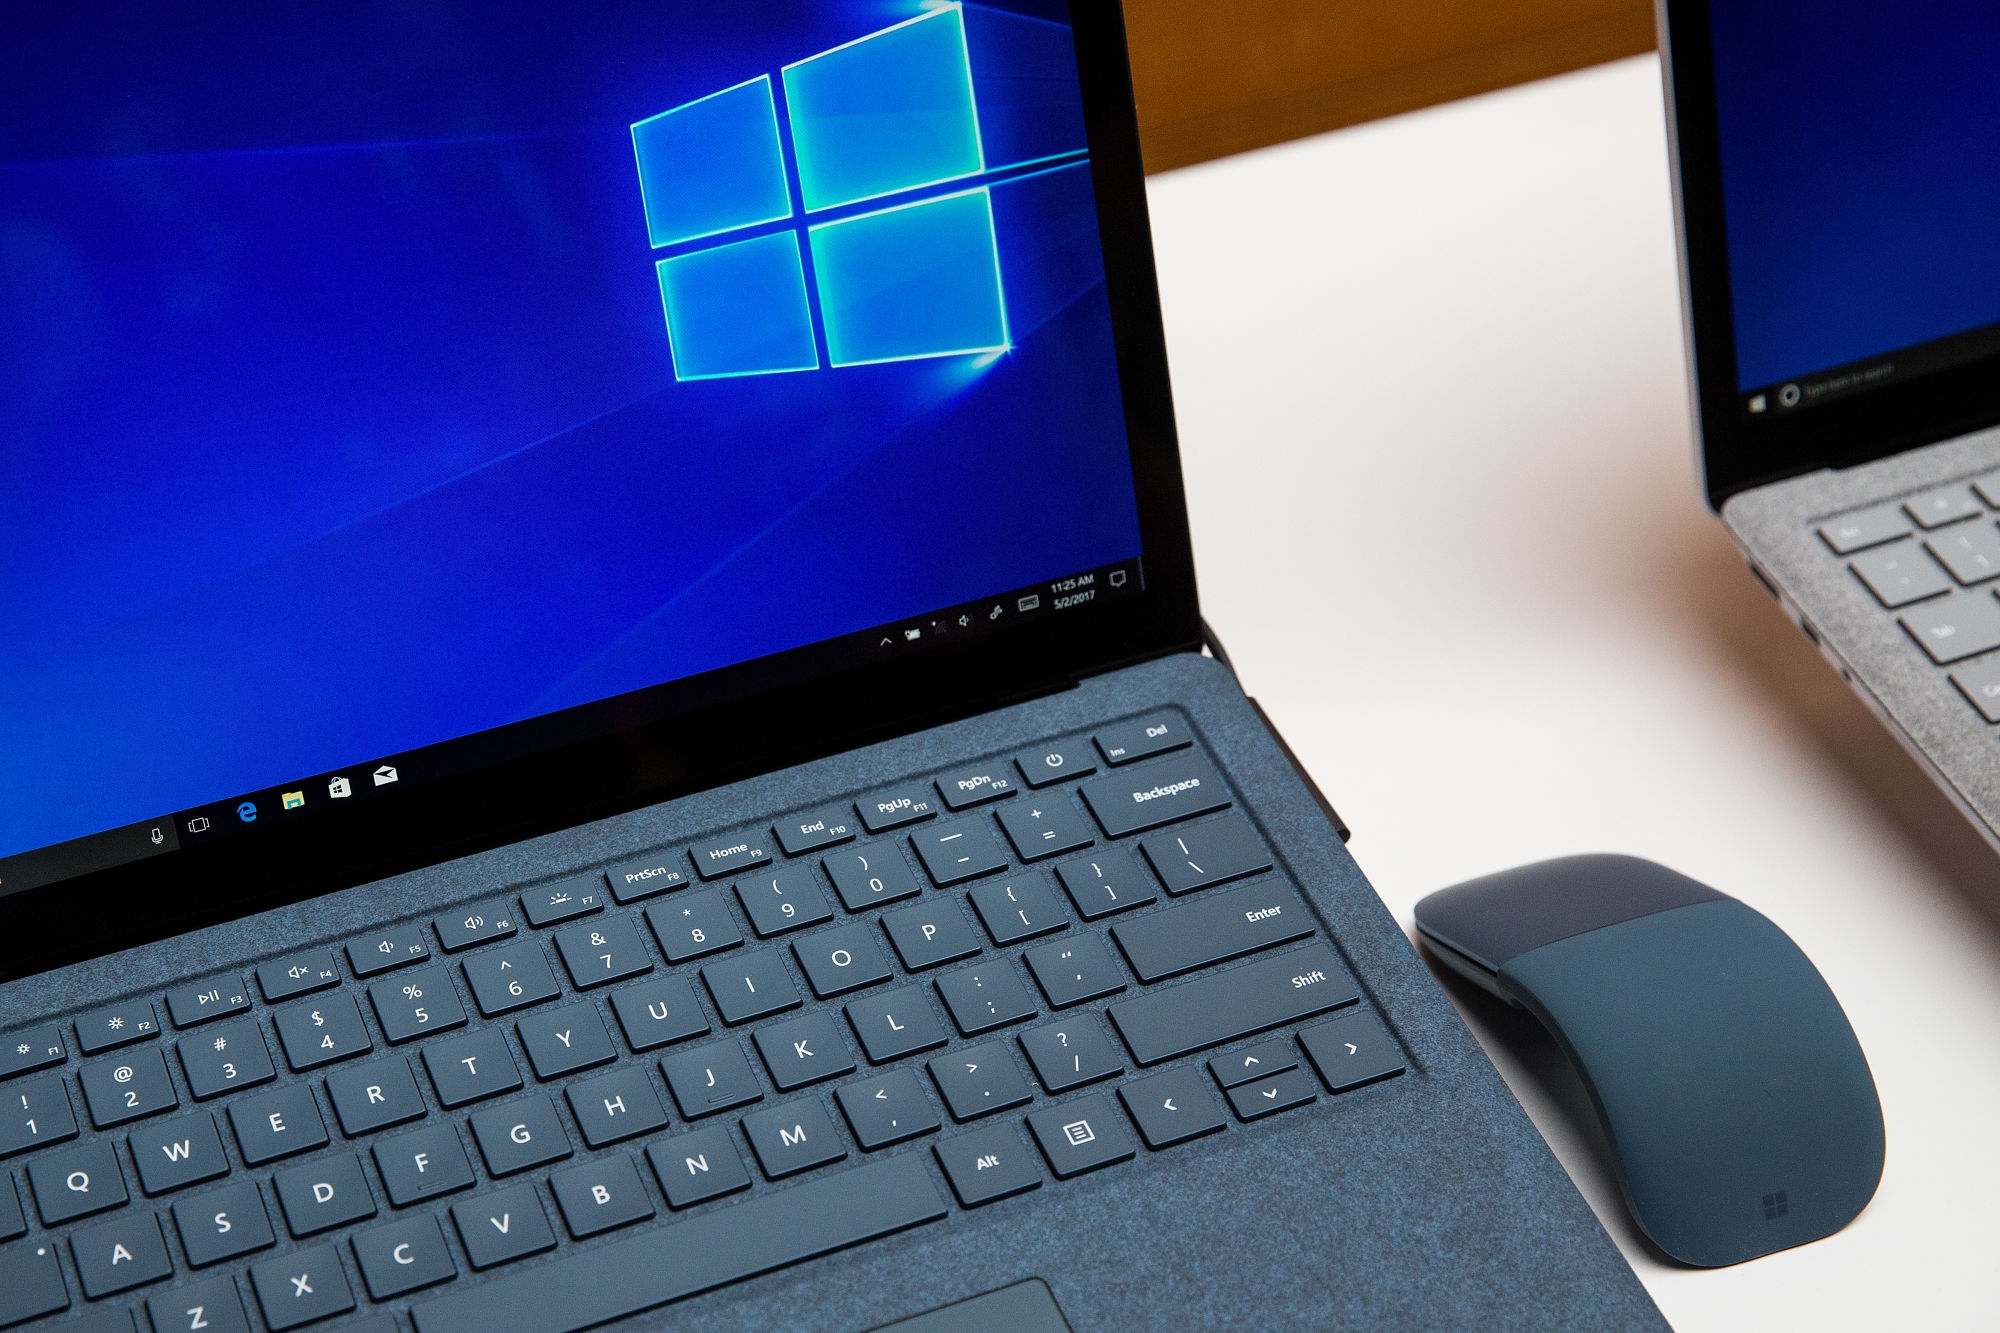 Windows 10 preview links bugs you find to existing feedback | DeviceDaily.com